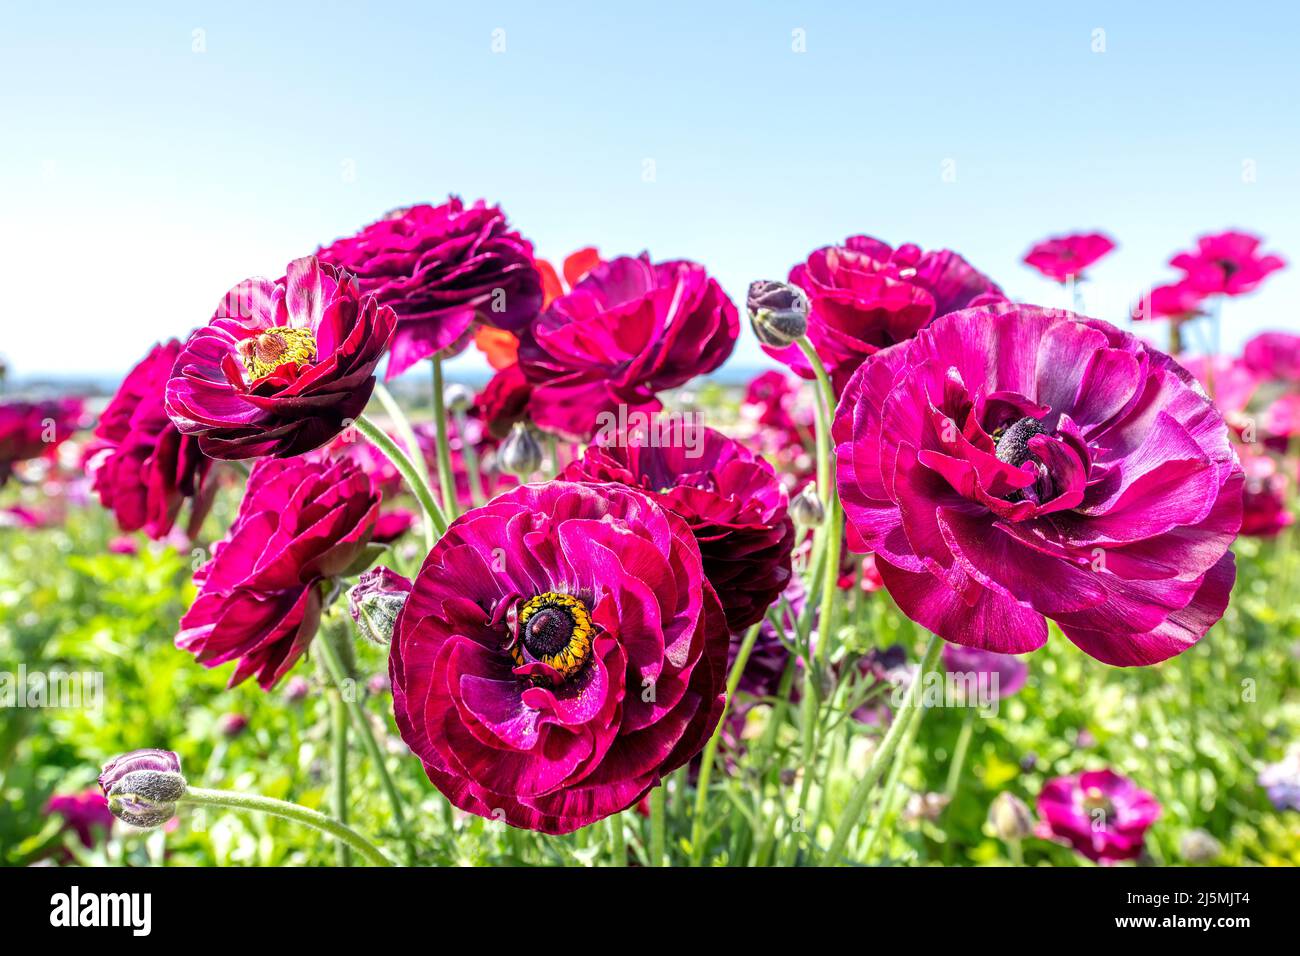 Purple ranunculus flowers in a large field of wildflowers during a bright, spring day Stock Photo